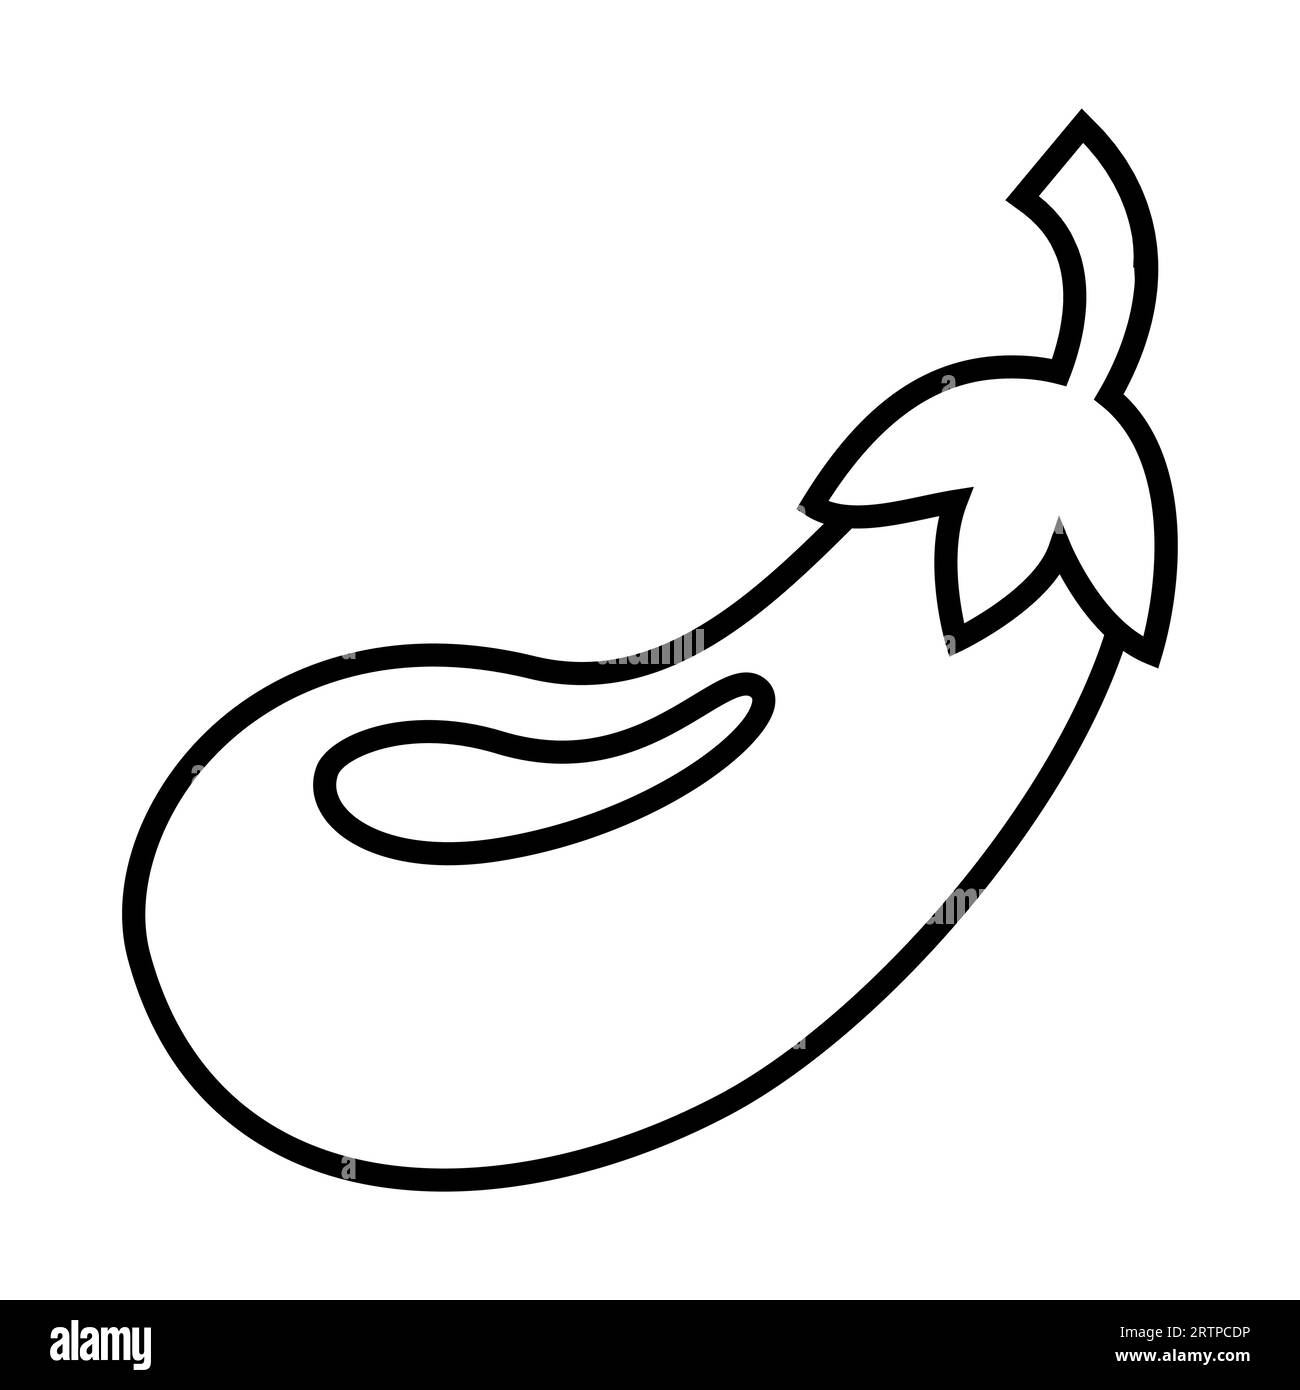 Aubergine Vegetable In One Line Drawing Style. Eggplant Isolated On White.  Single Outline Brinjal Sketch And Color Spot. Fresh Food Vegan Concept  Design. Continuous Hand Drawn Flat Vector Illustration Royalty Free SVG,